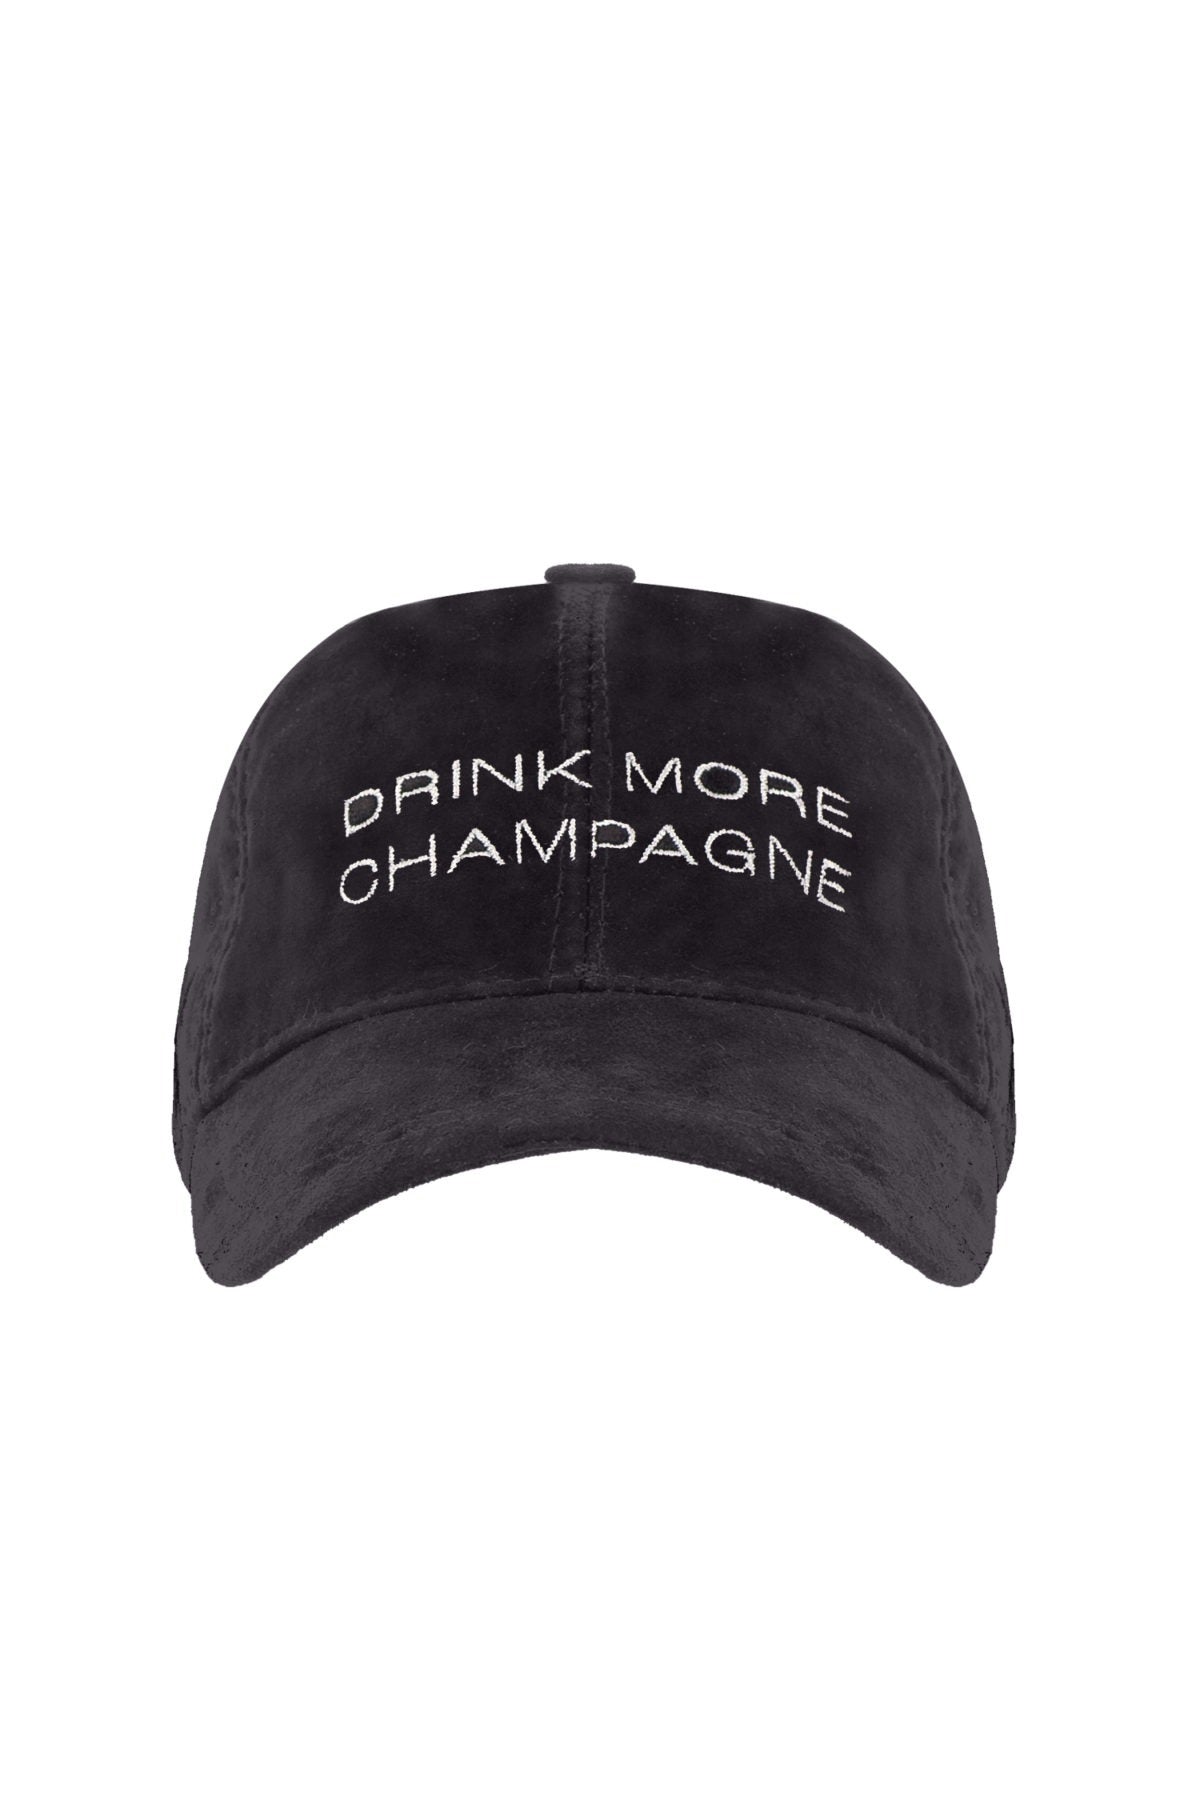 Load image into Gallery viewer, Drink More Champagne - Black
